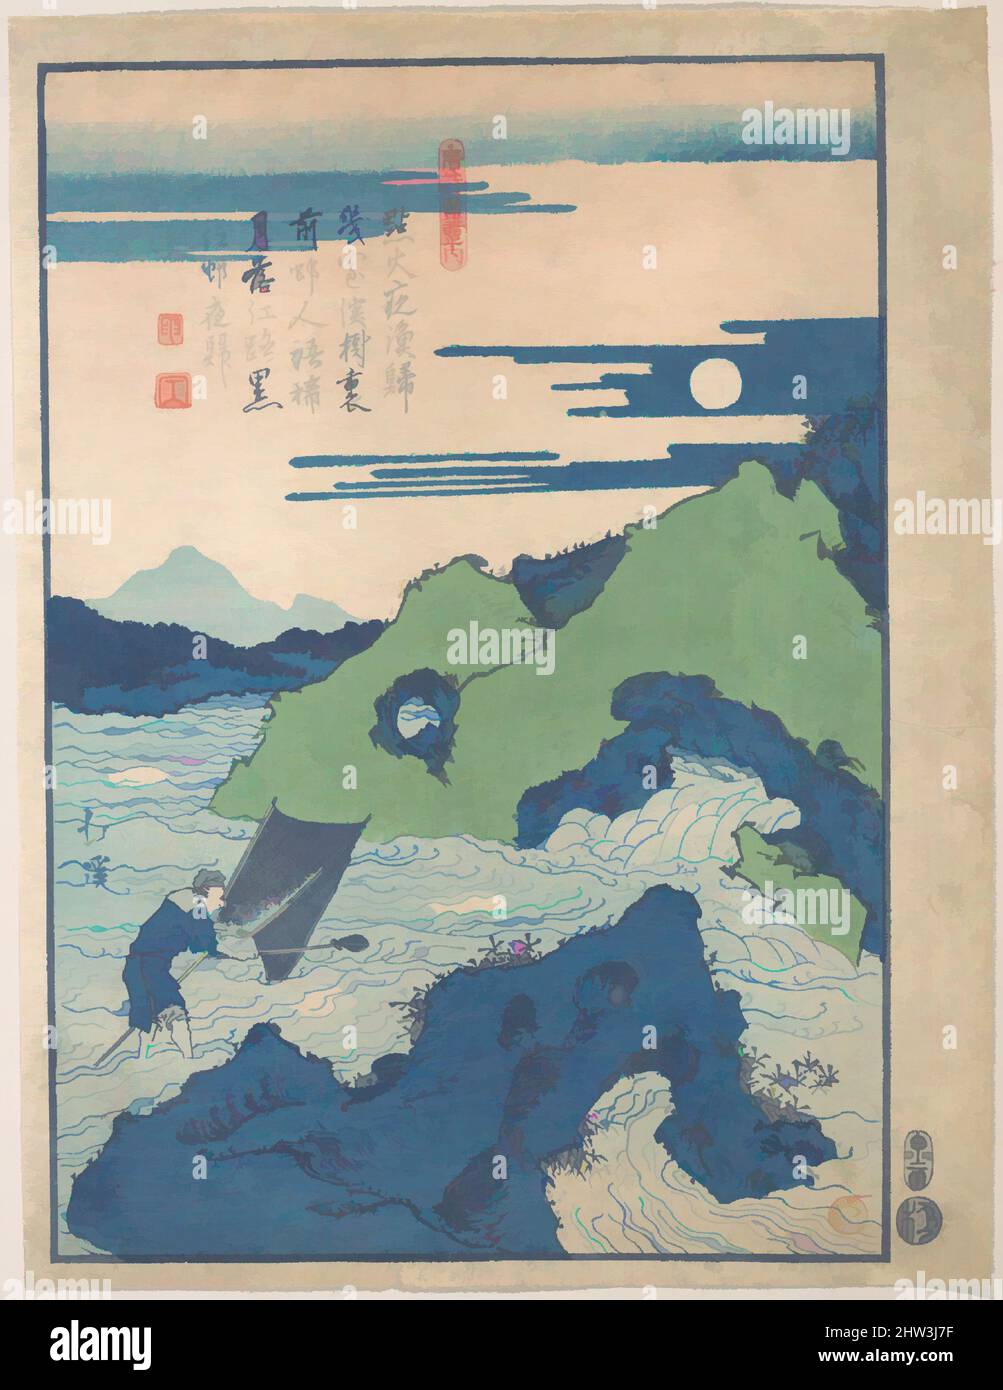 Art inspired by A Fisherman is Struggling amid the Rocks and Currents of an Inlet of the Sea, Edo period (1615–1868), Japan, Polychrome woodblock print; ink and color on paper, H. 10 1/2 in. (26.7 cm); W. 8 in. (20.3 cm), Prints, Totoya Hokkei (Japanese, 1780–1850, Classic works modernized by Artotop with a splash of modernity. Shapes, color and value, eye-catching visual impact on art. Emotions through freedom of artworks in a contemporary way. A timeless message pursuing a wildly creative new direction. Artists turning to the digital medium and creating the Artotop NFT Stock Photo